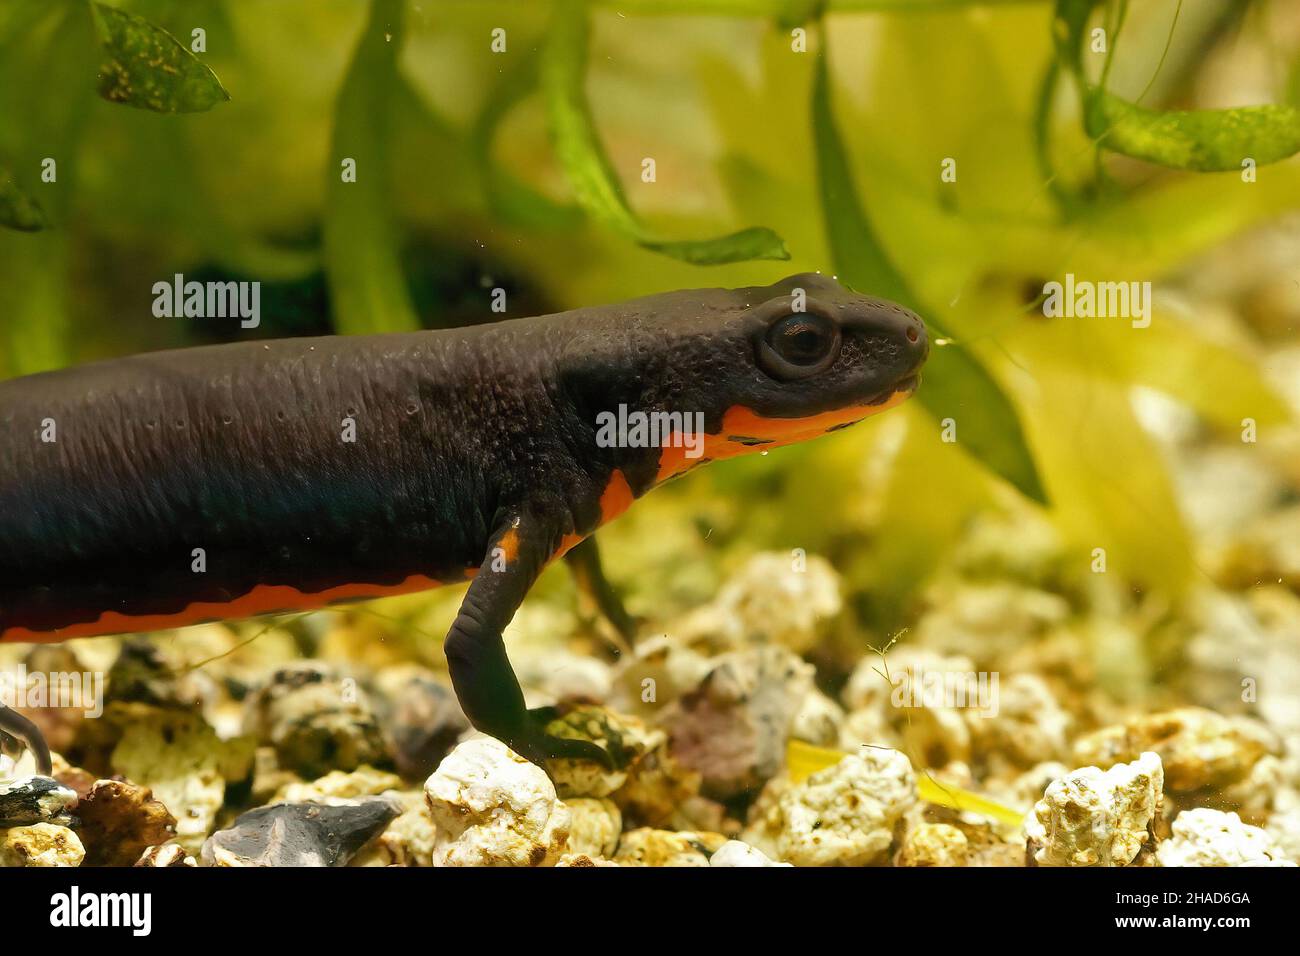 Closeup on an aquatic adult black Chinese fire -bellied newt, Cynops orientalis, in an aquarium Stock Photo